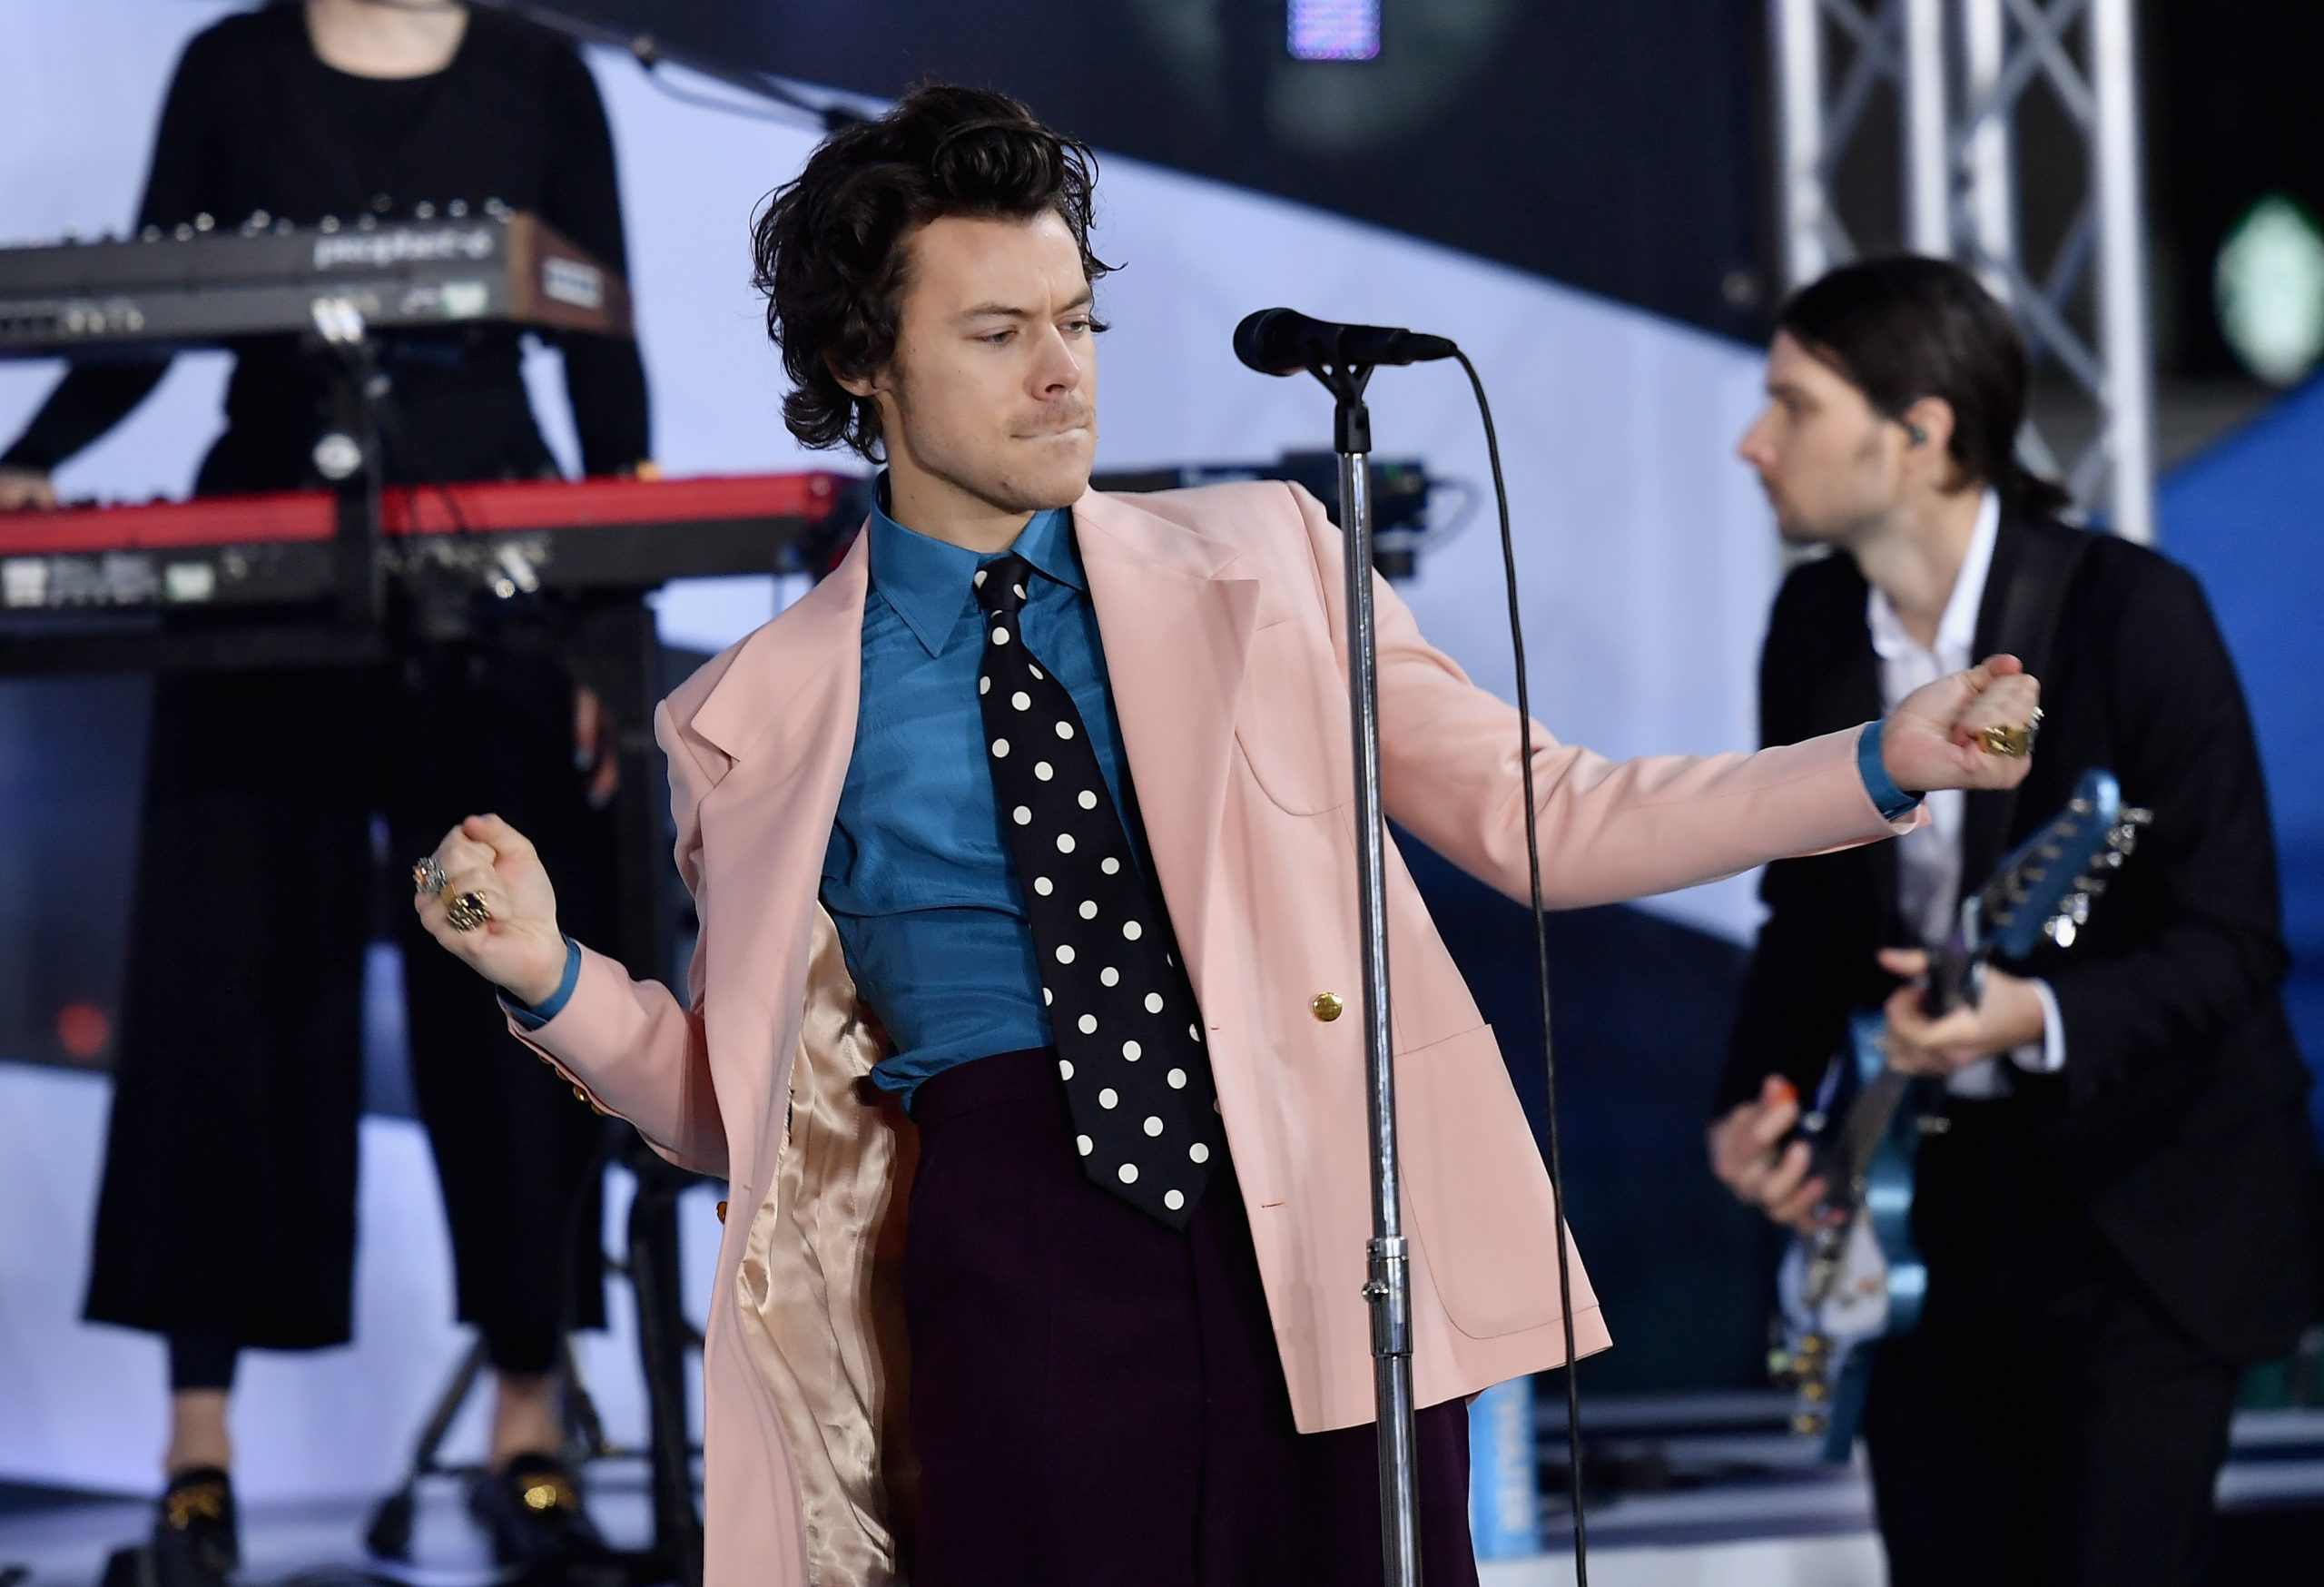 Harry Styles and Florence Pugh Are an Electric Pairing in First Trailer for Olivia Wilde’s ‘Don’t Worry Darling’